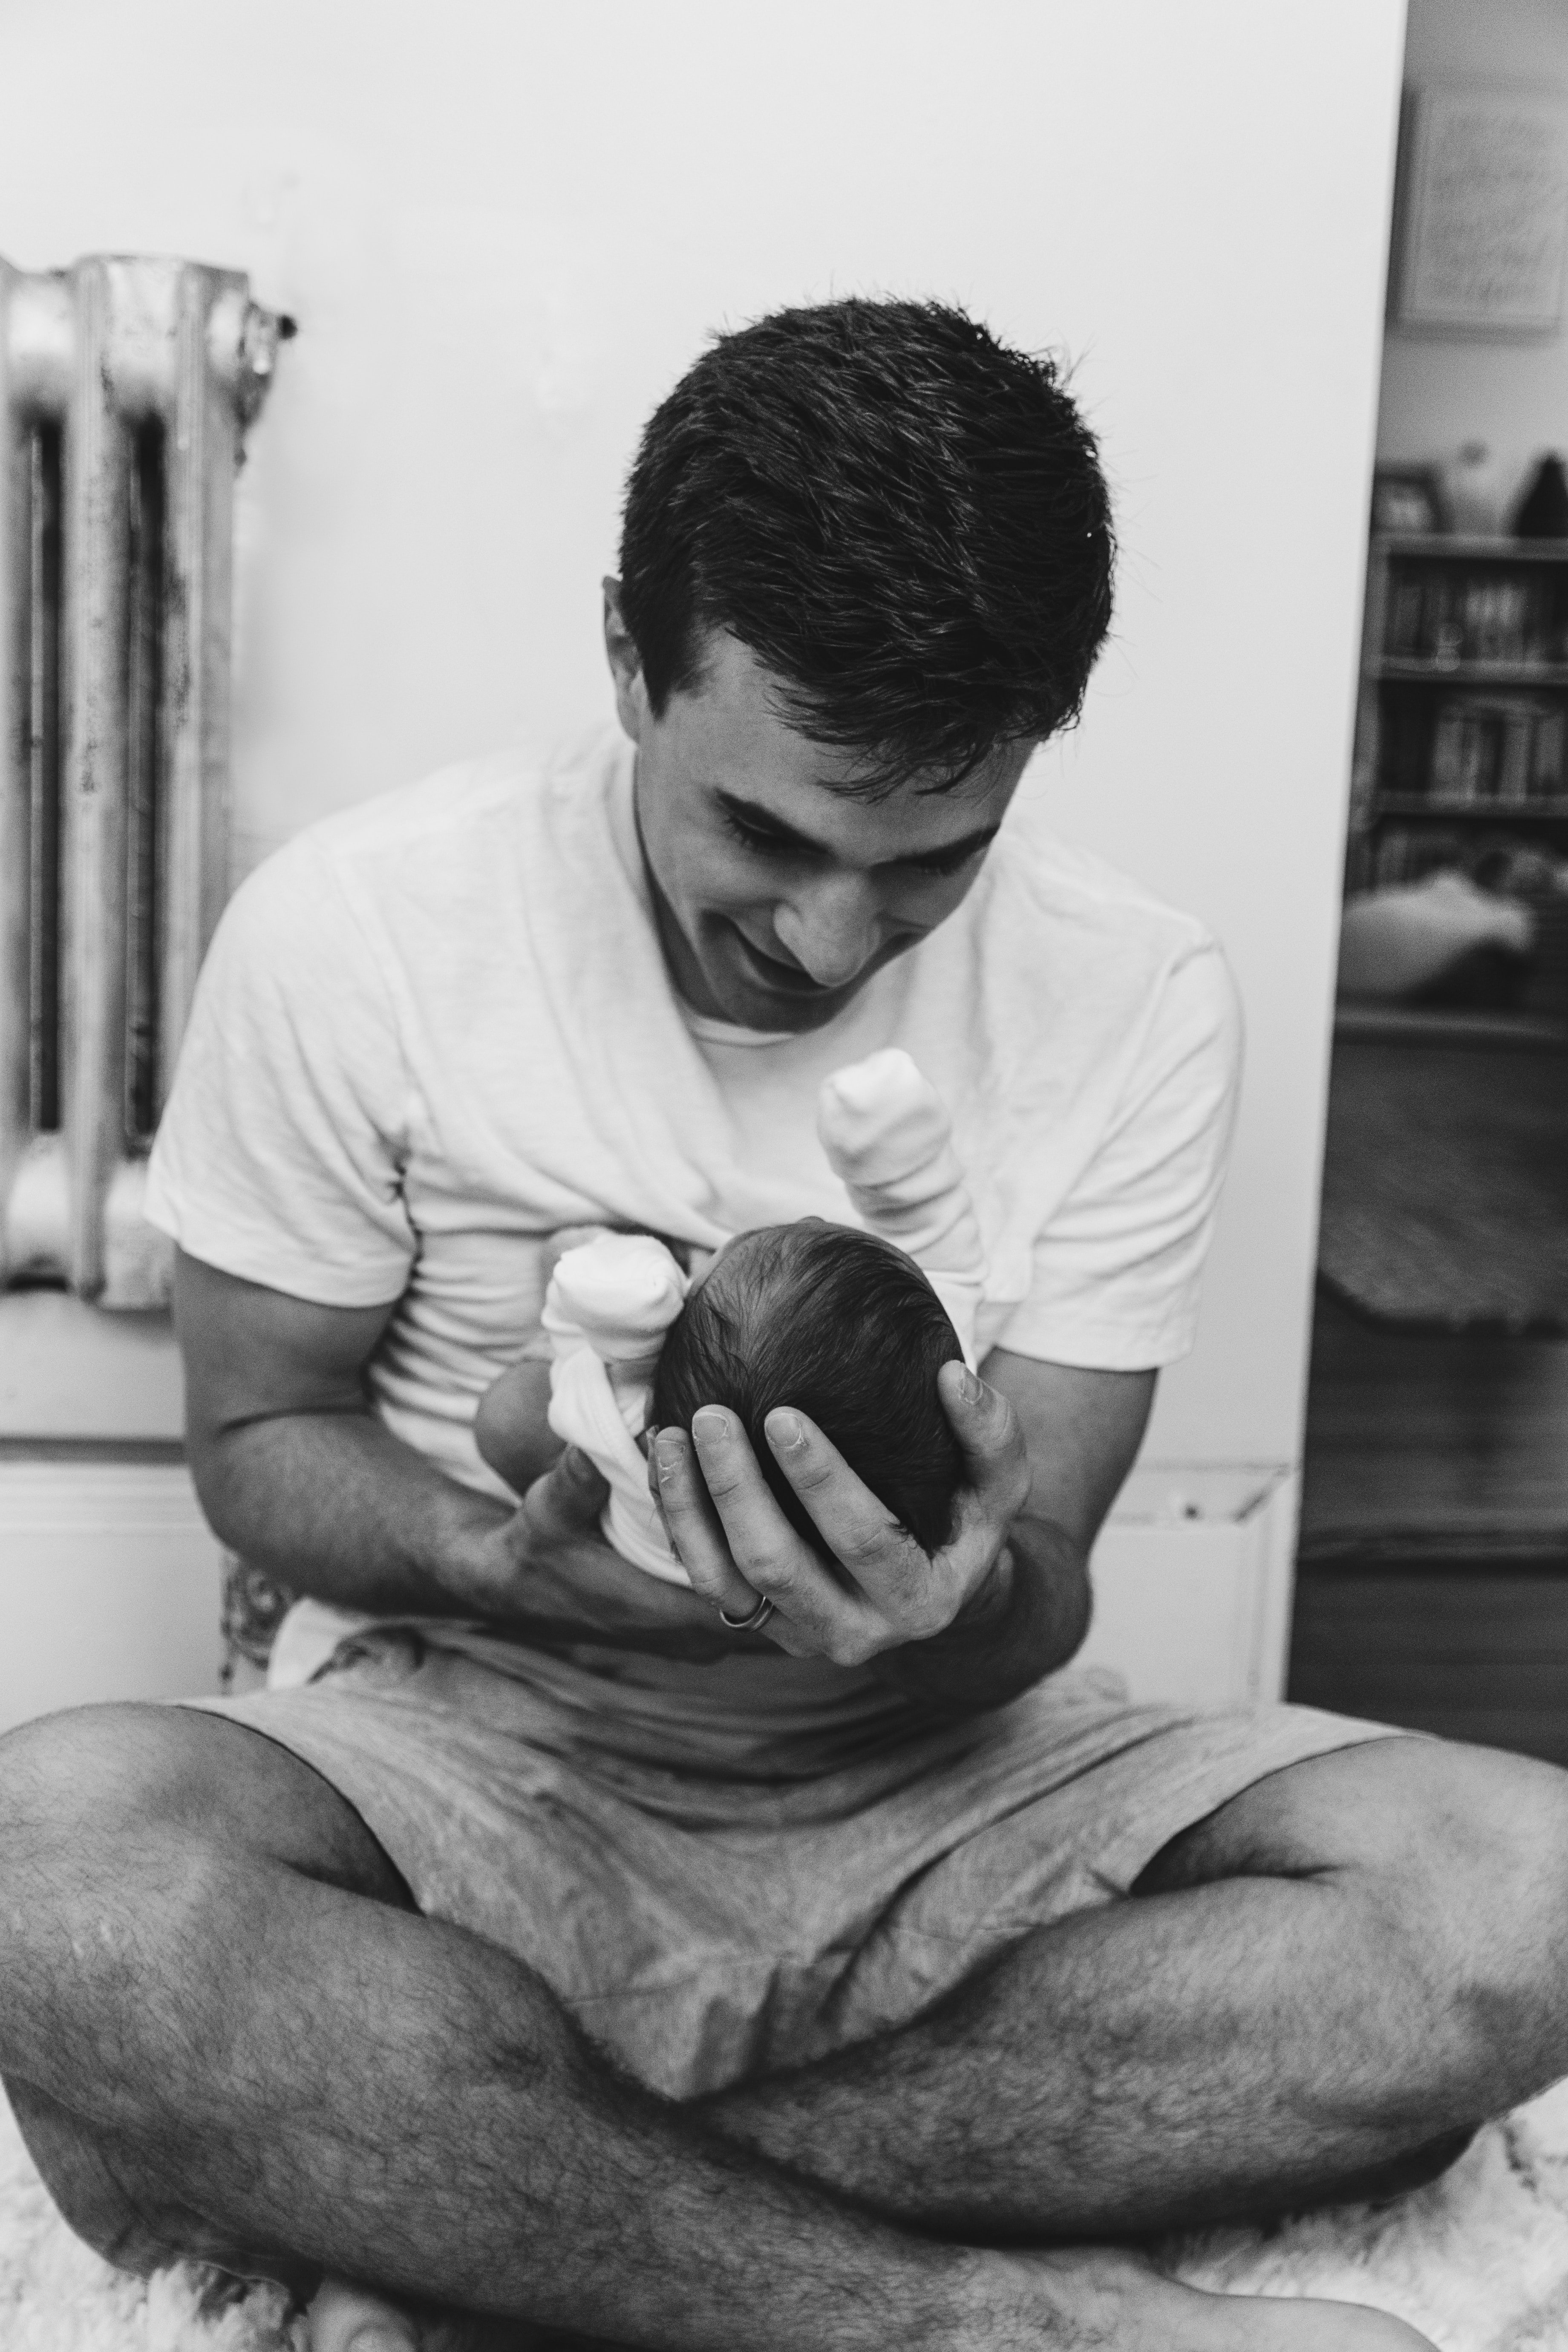 A young man looks down adoringly at the baby he is cuddling | Photo by Kelly Sikkema on Unsplash